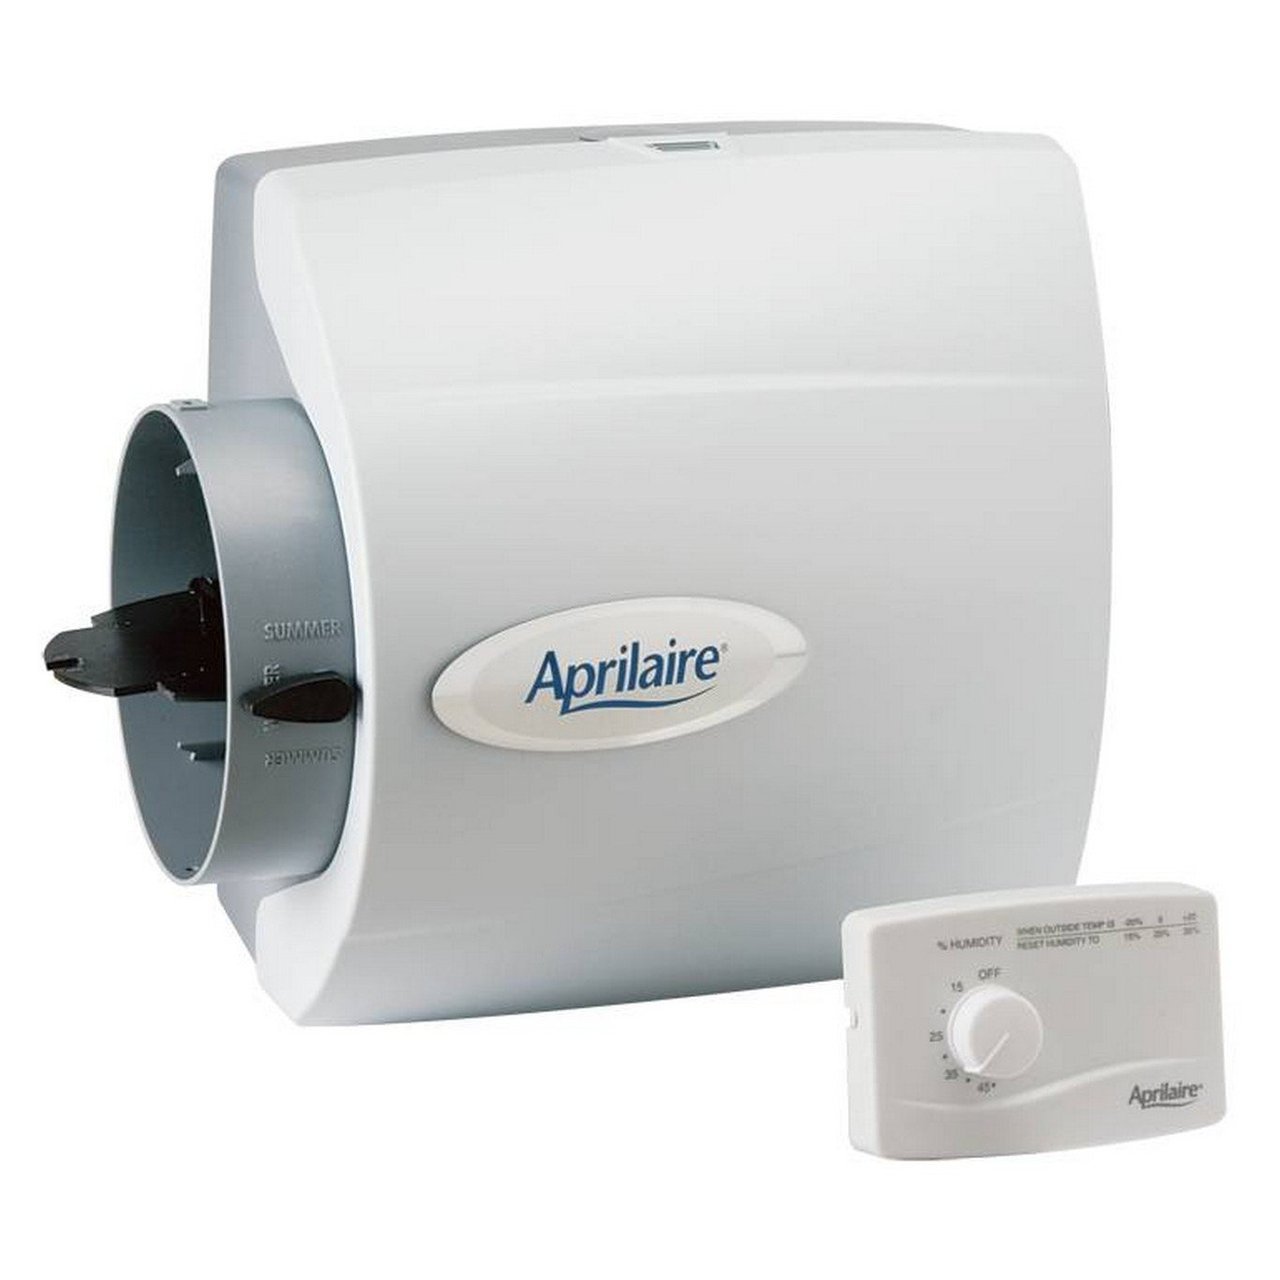 APRILAIRE MANUAL HUMIDIFIER (SMALL BYPASS)